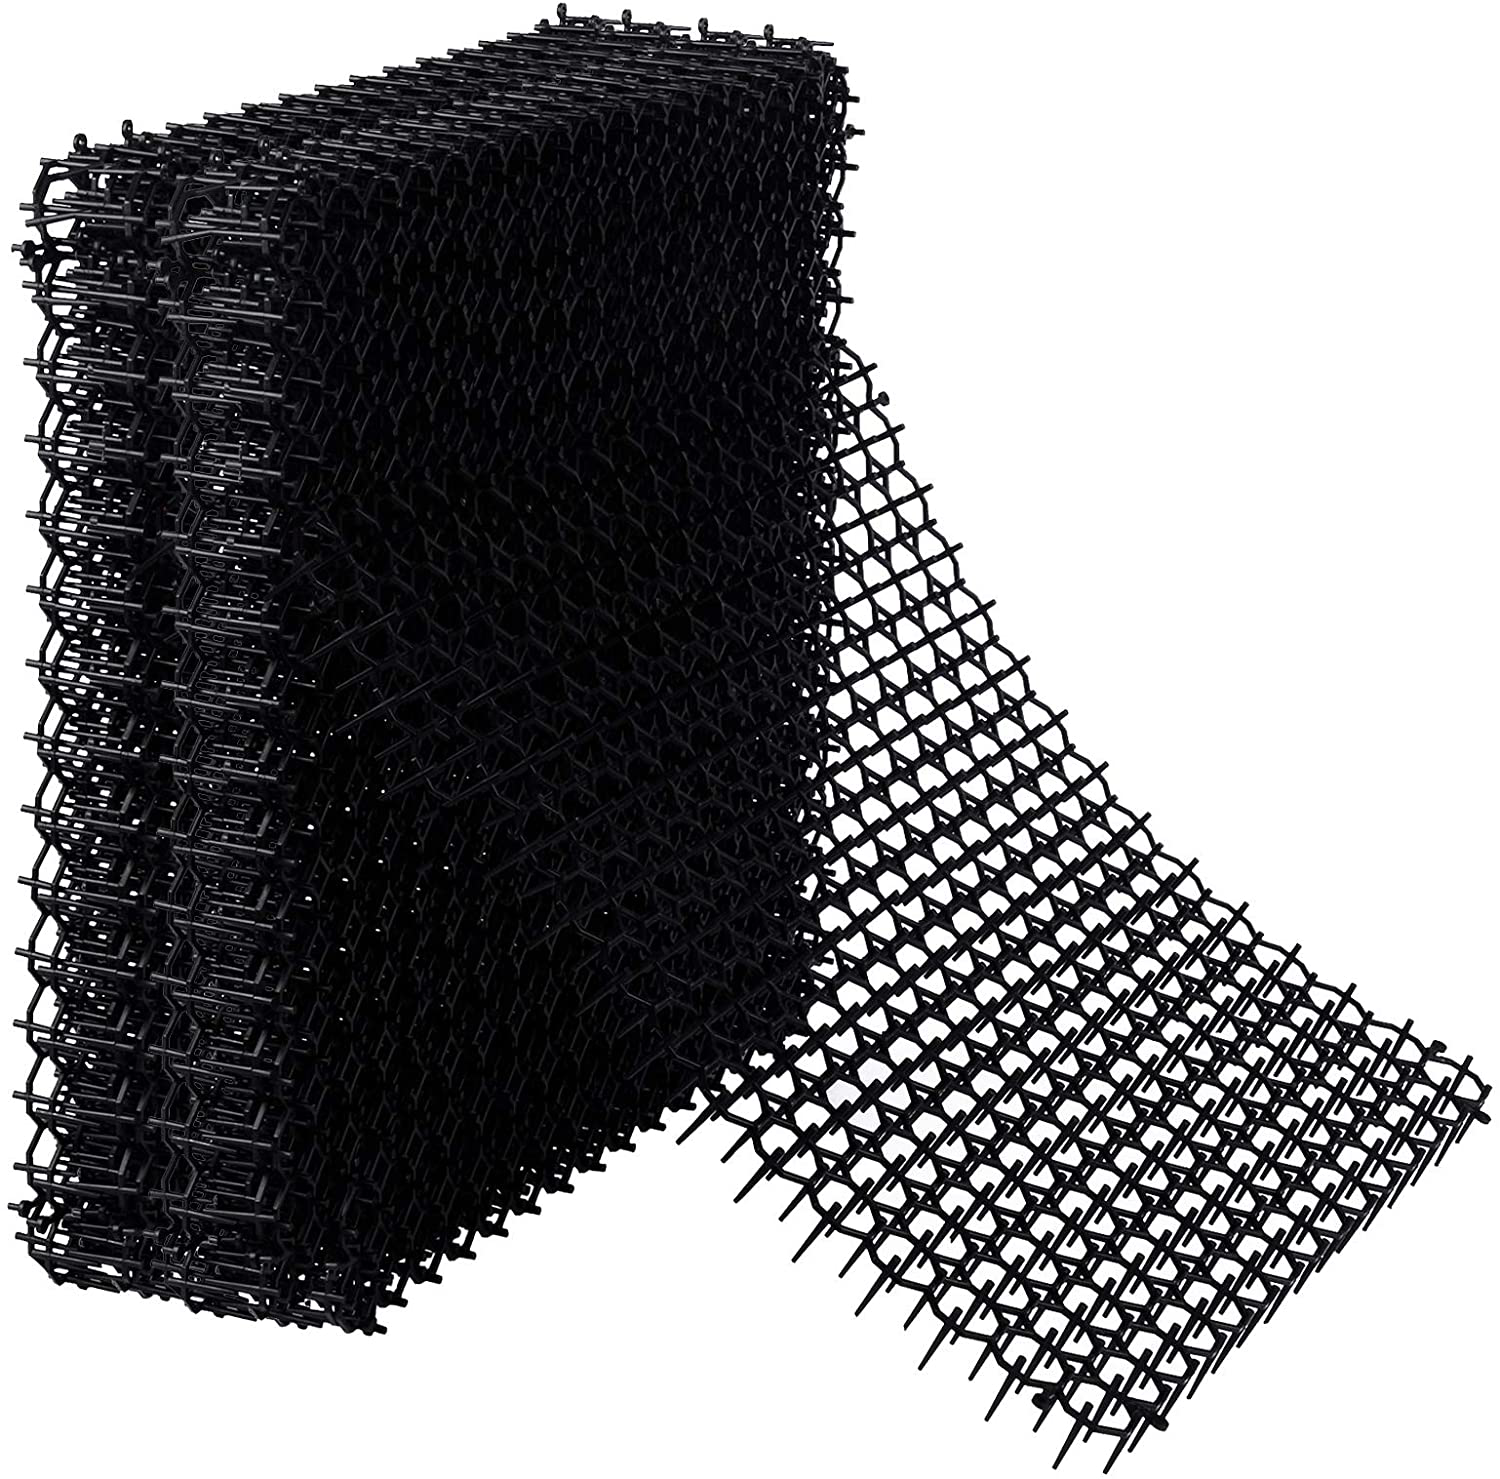 Hmdivor Scat Mat for Cats 12 Pack 17 X 14 Inch Square Cat and Dog Scat Mats for Cats Prickle Strips from Digging Cat Deterrent Outdoor(Black)